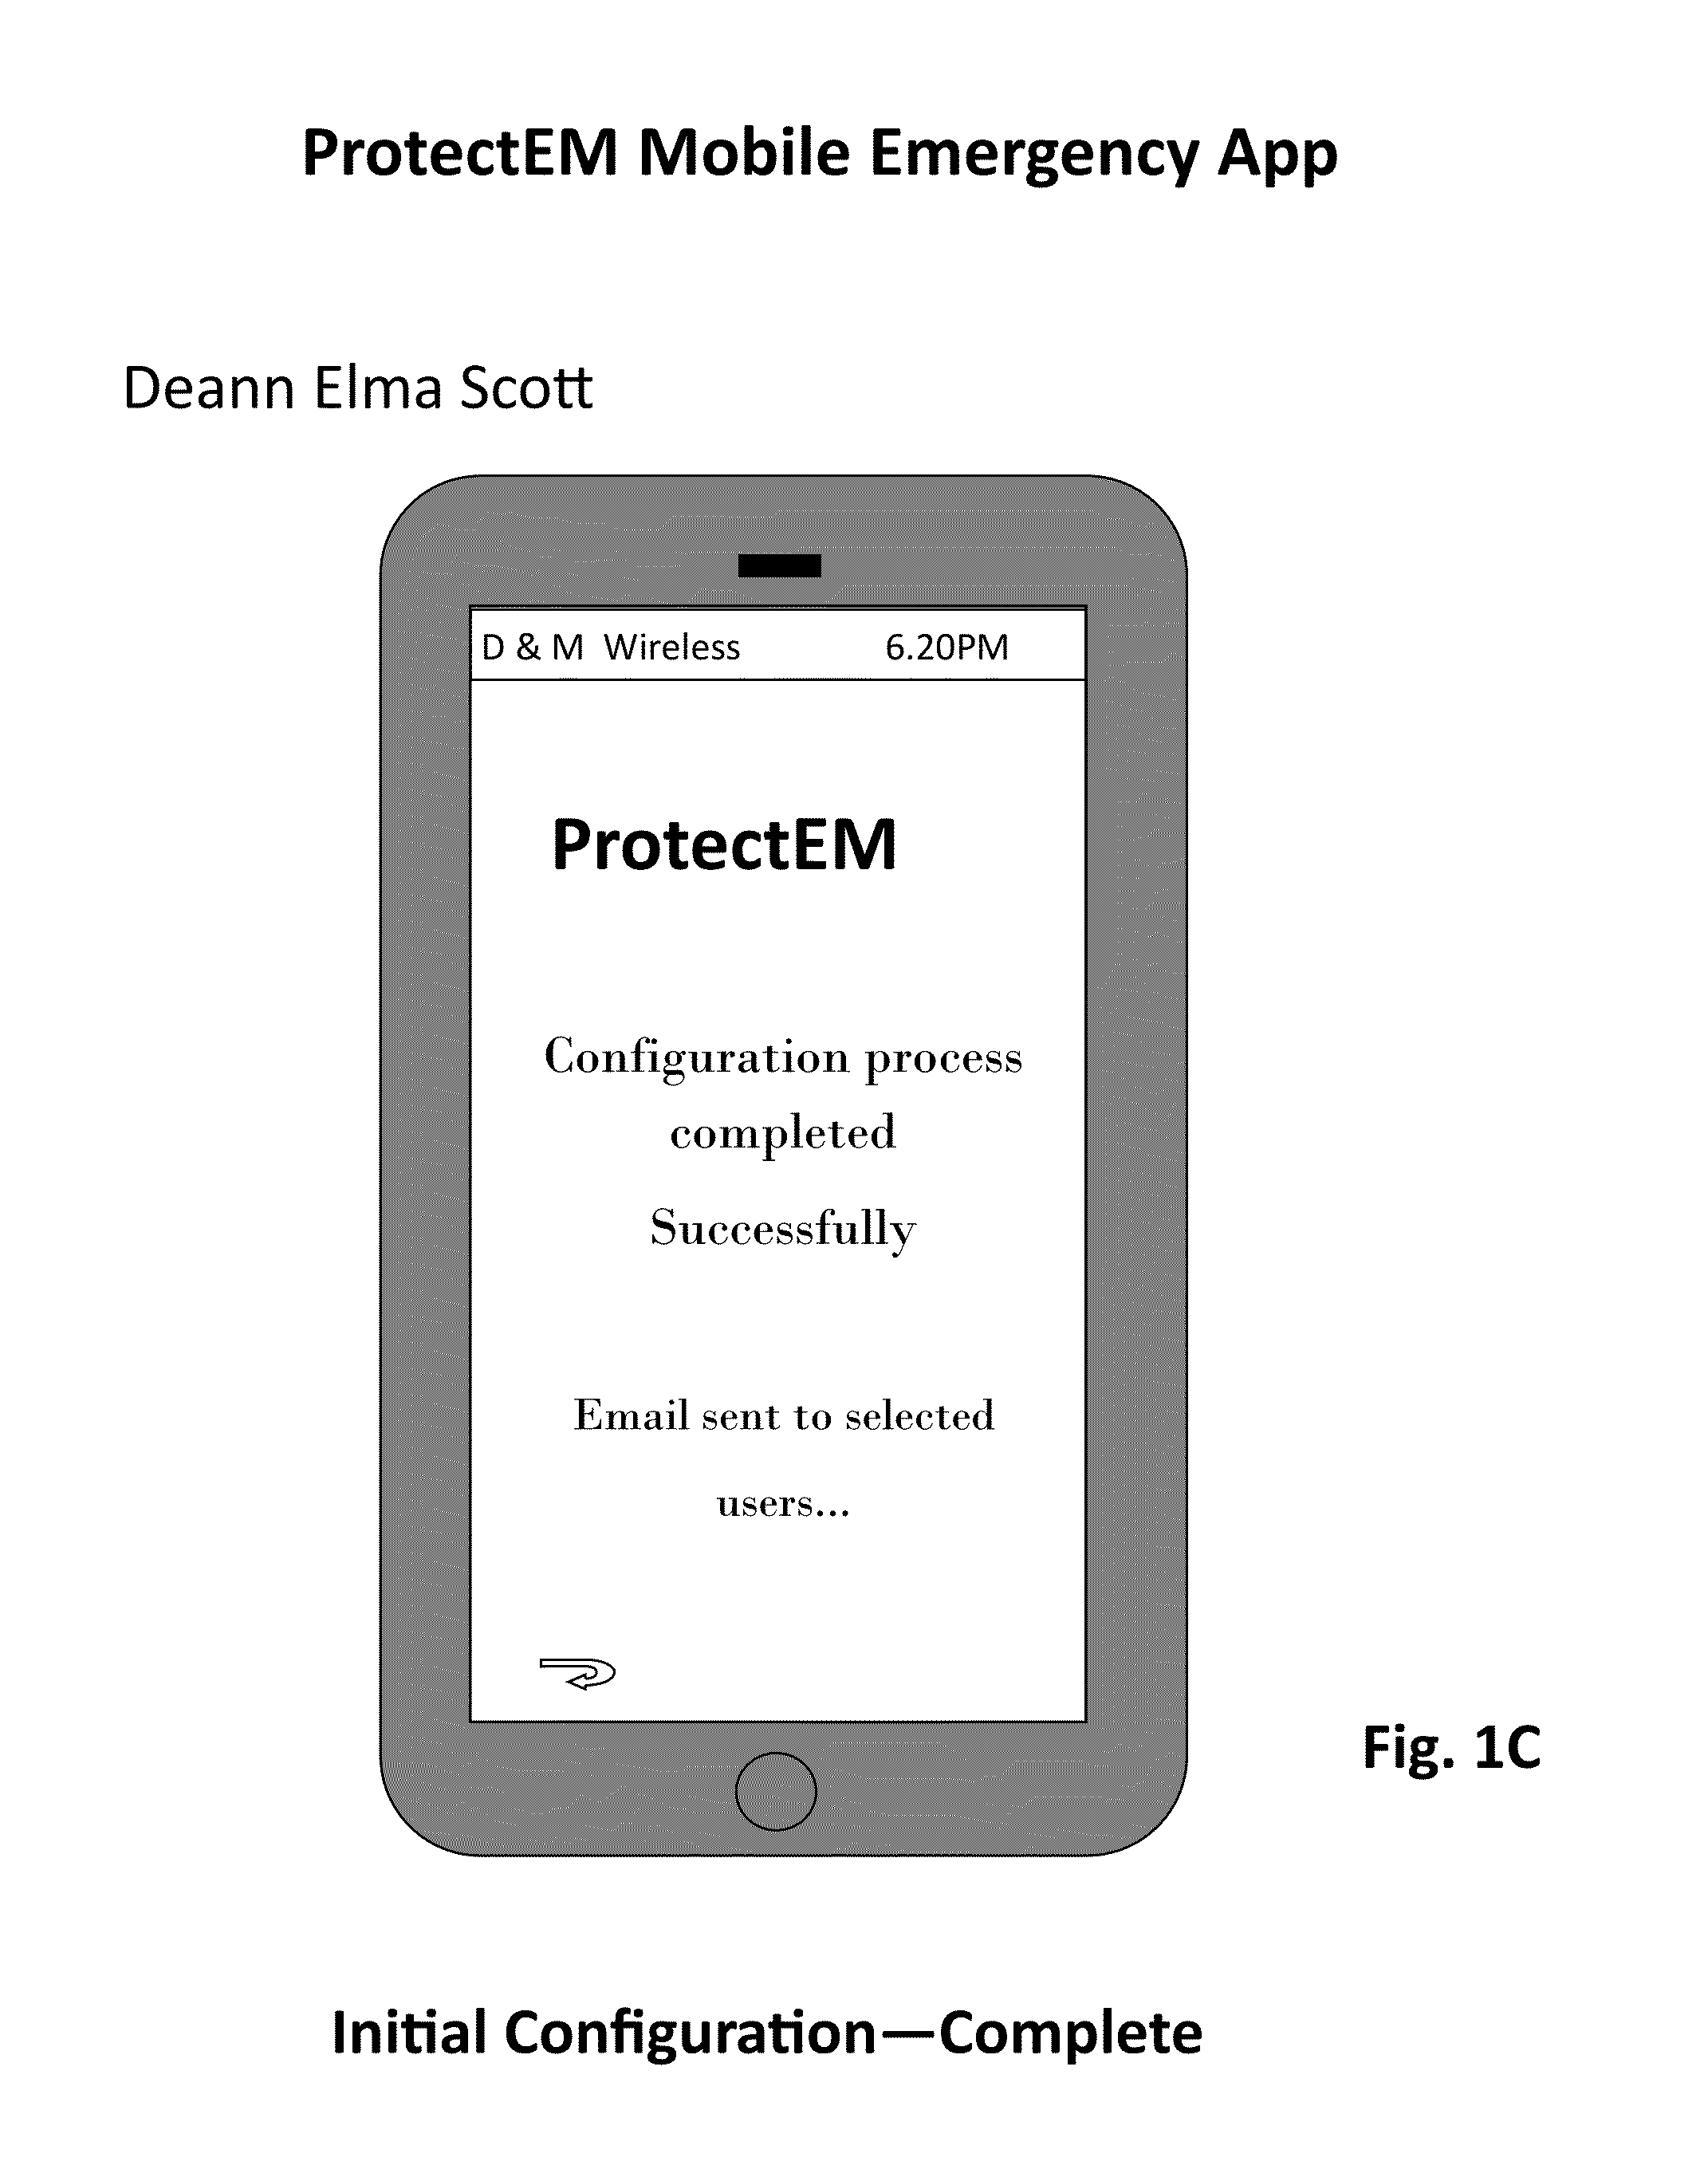 ProtectEM (Domestic Abuse and Emergency App)